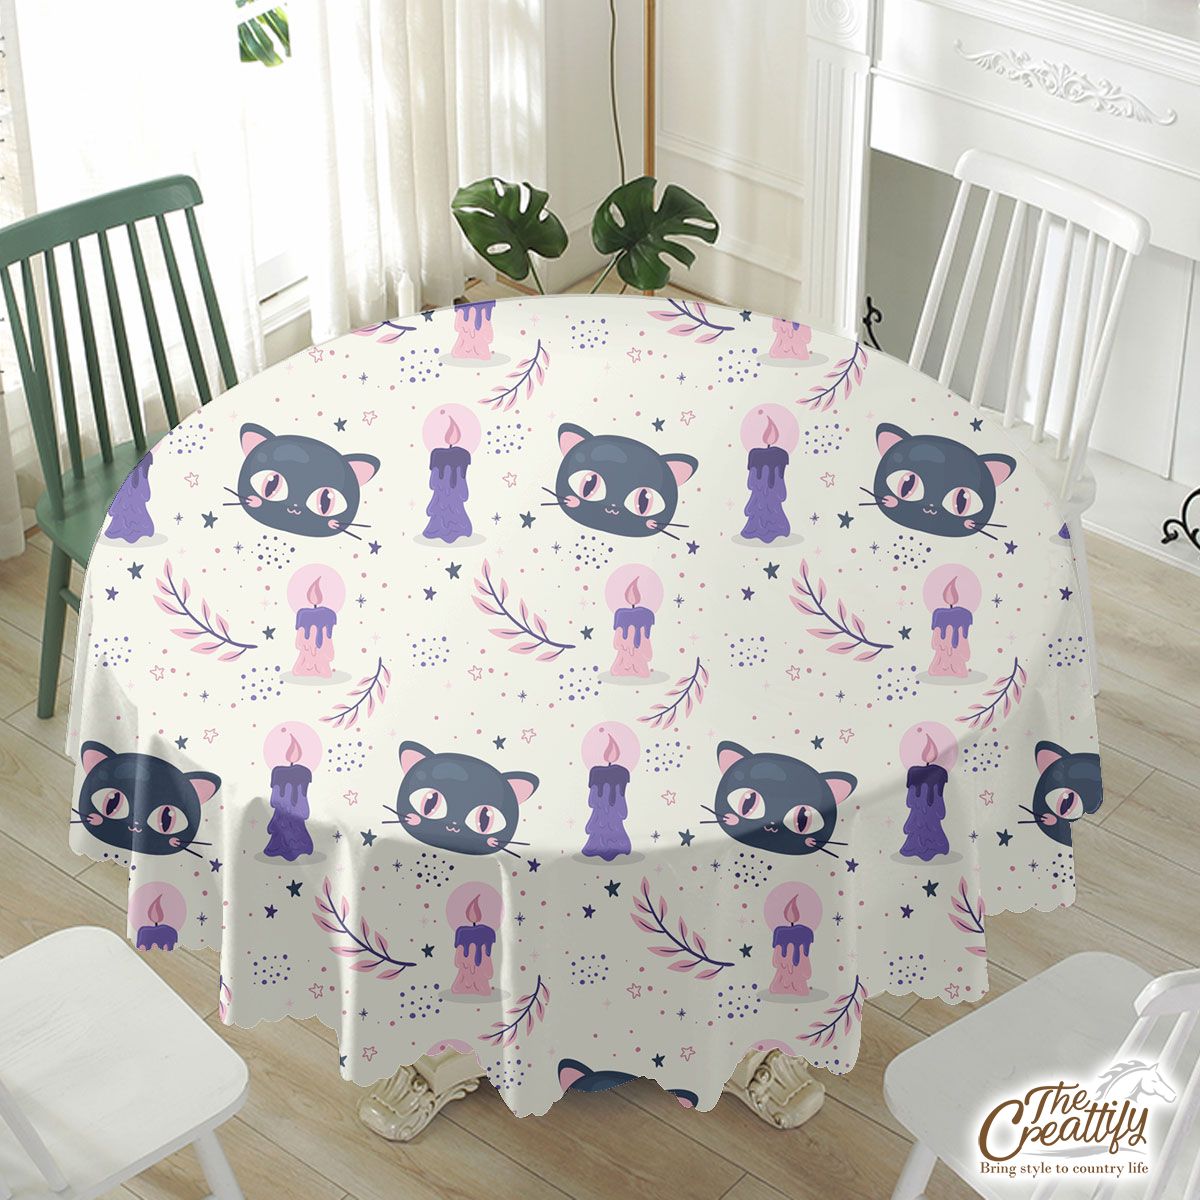 Happy Halloween With Black Cat On The Light Background Waterproof Tablecloth